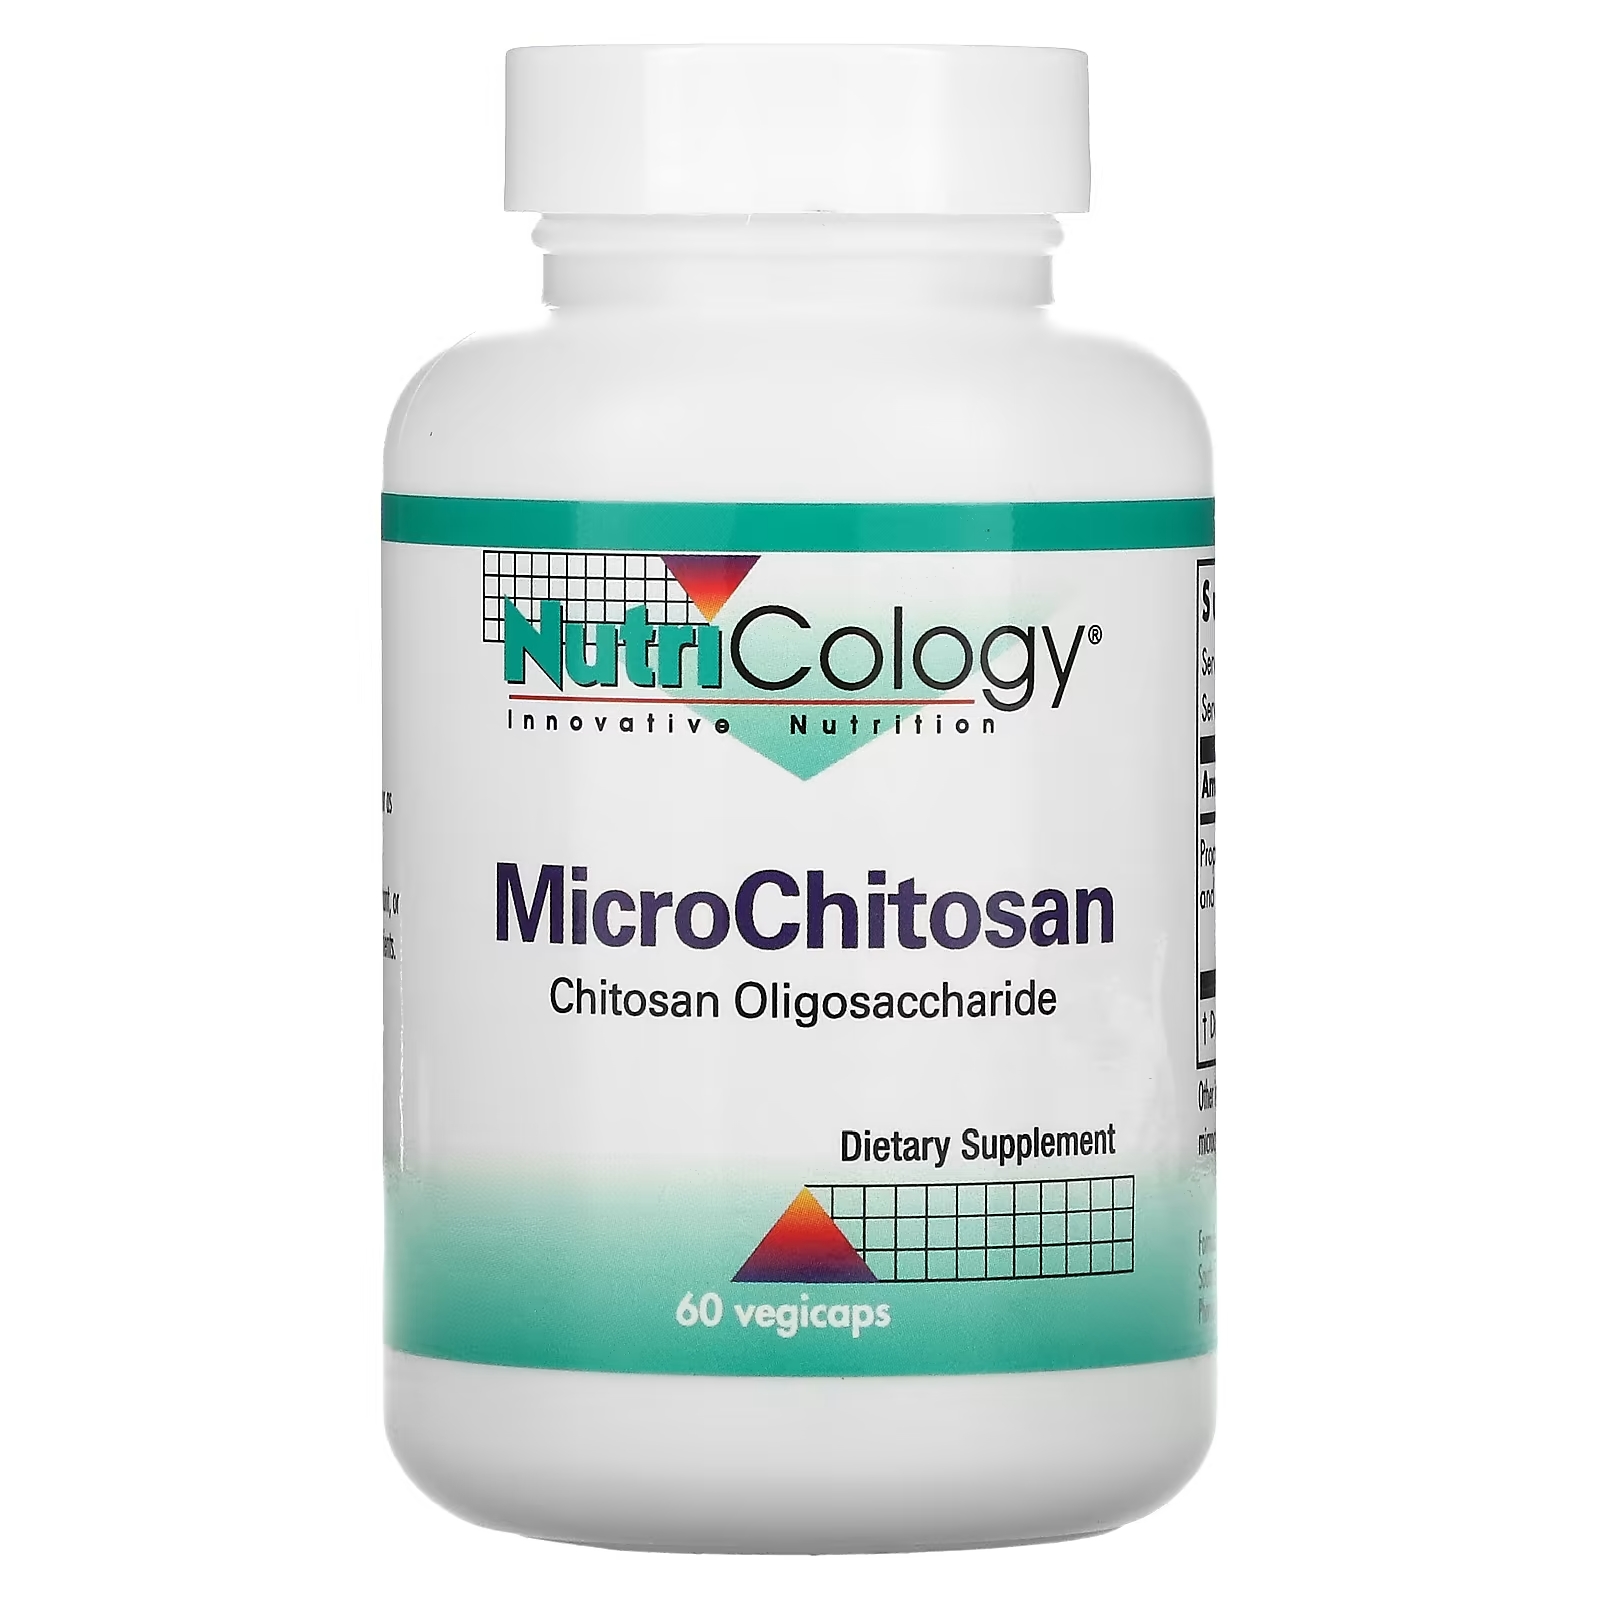 Nutricology MicroChitosan, 60 вегетарианских капсул nutricology полынь однолетняя 100 вегетарианских капсул